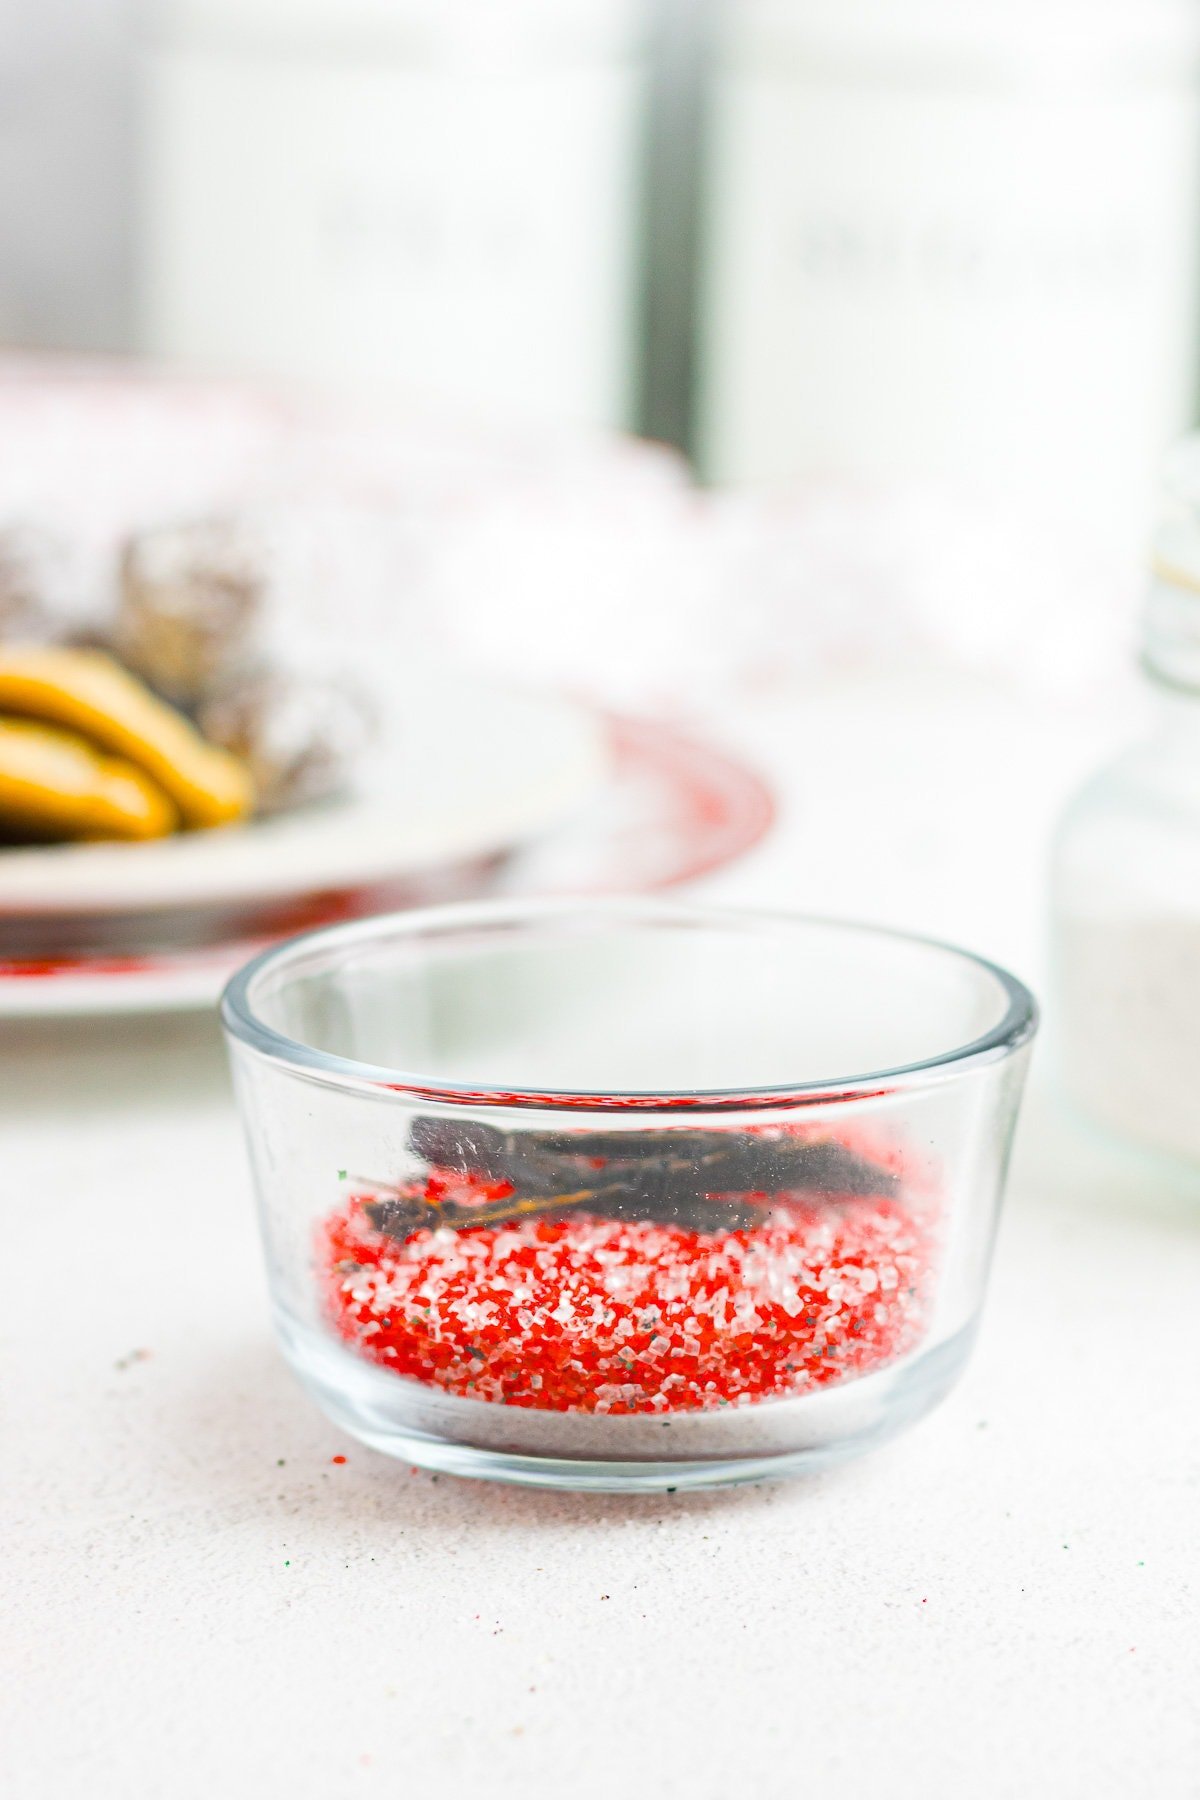 Red sugar crystals that have been flavored with vanilla.